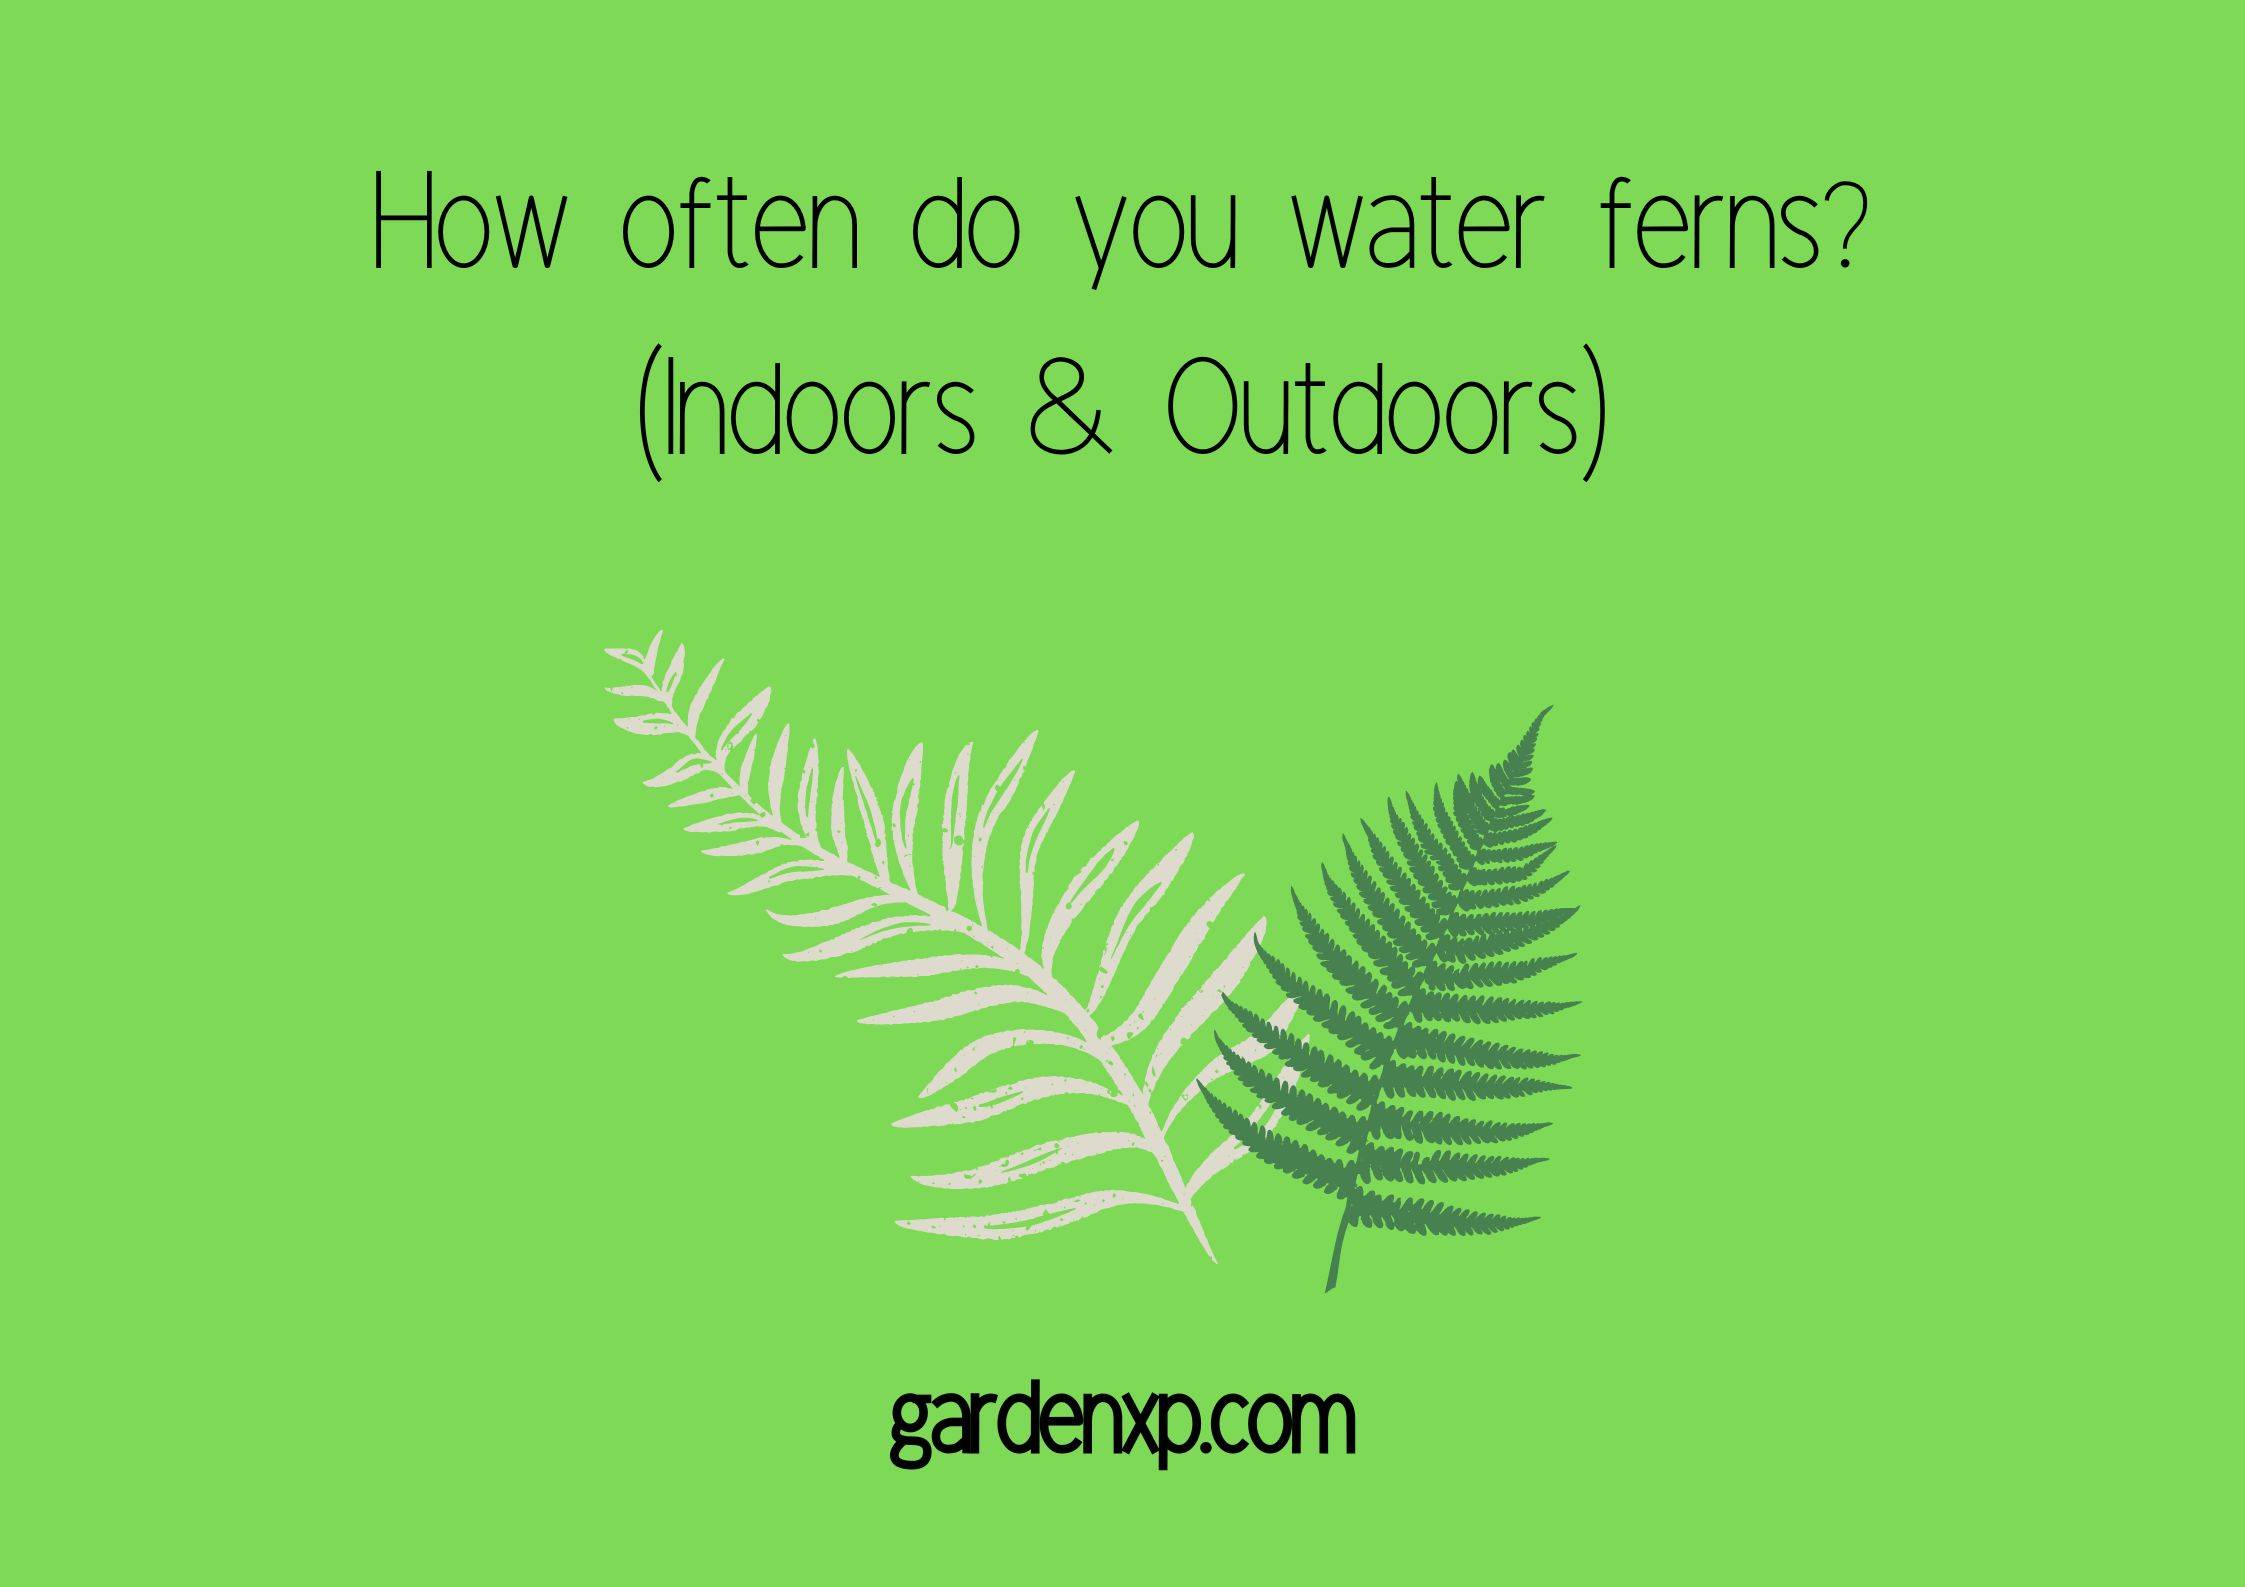 How often do you water ferns? (Indoors & Outdoors)